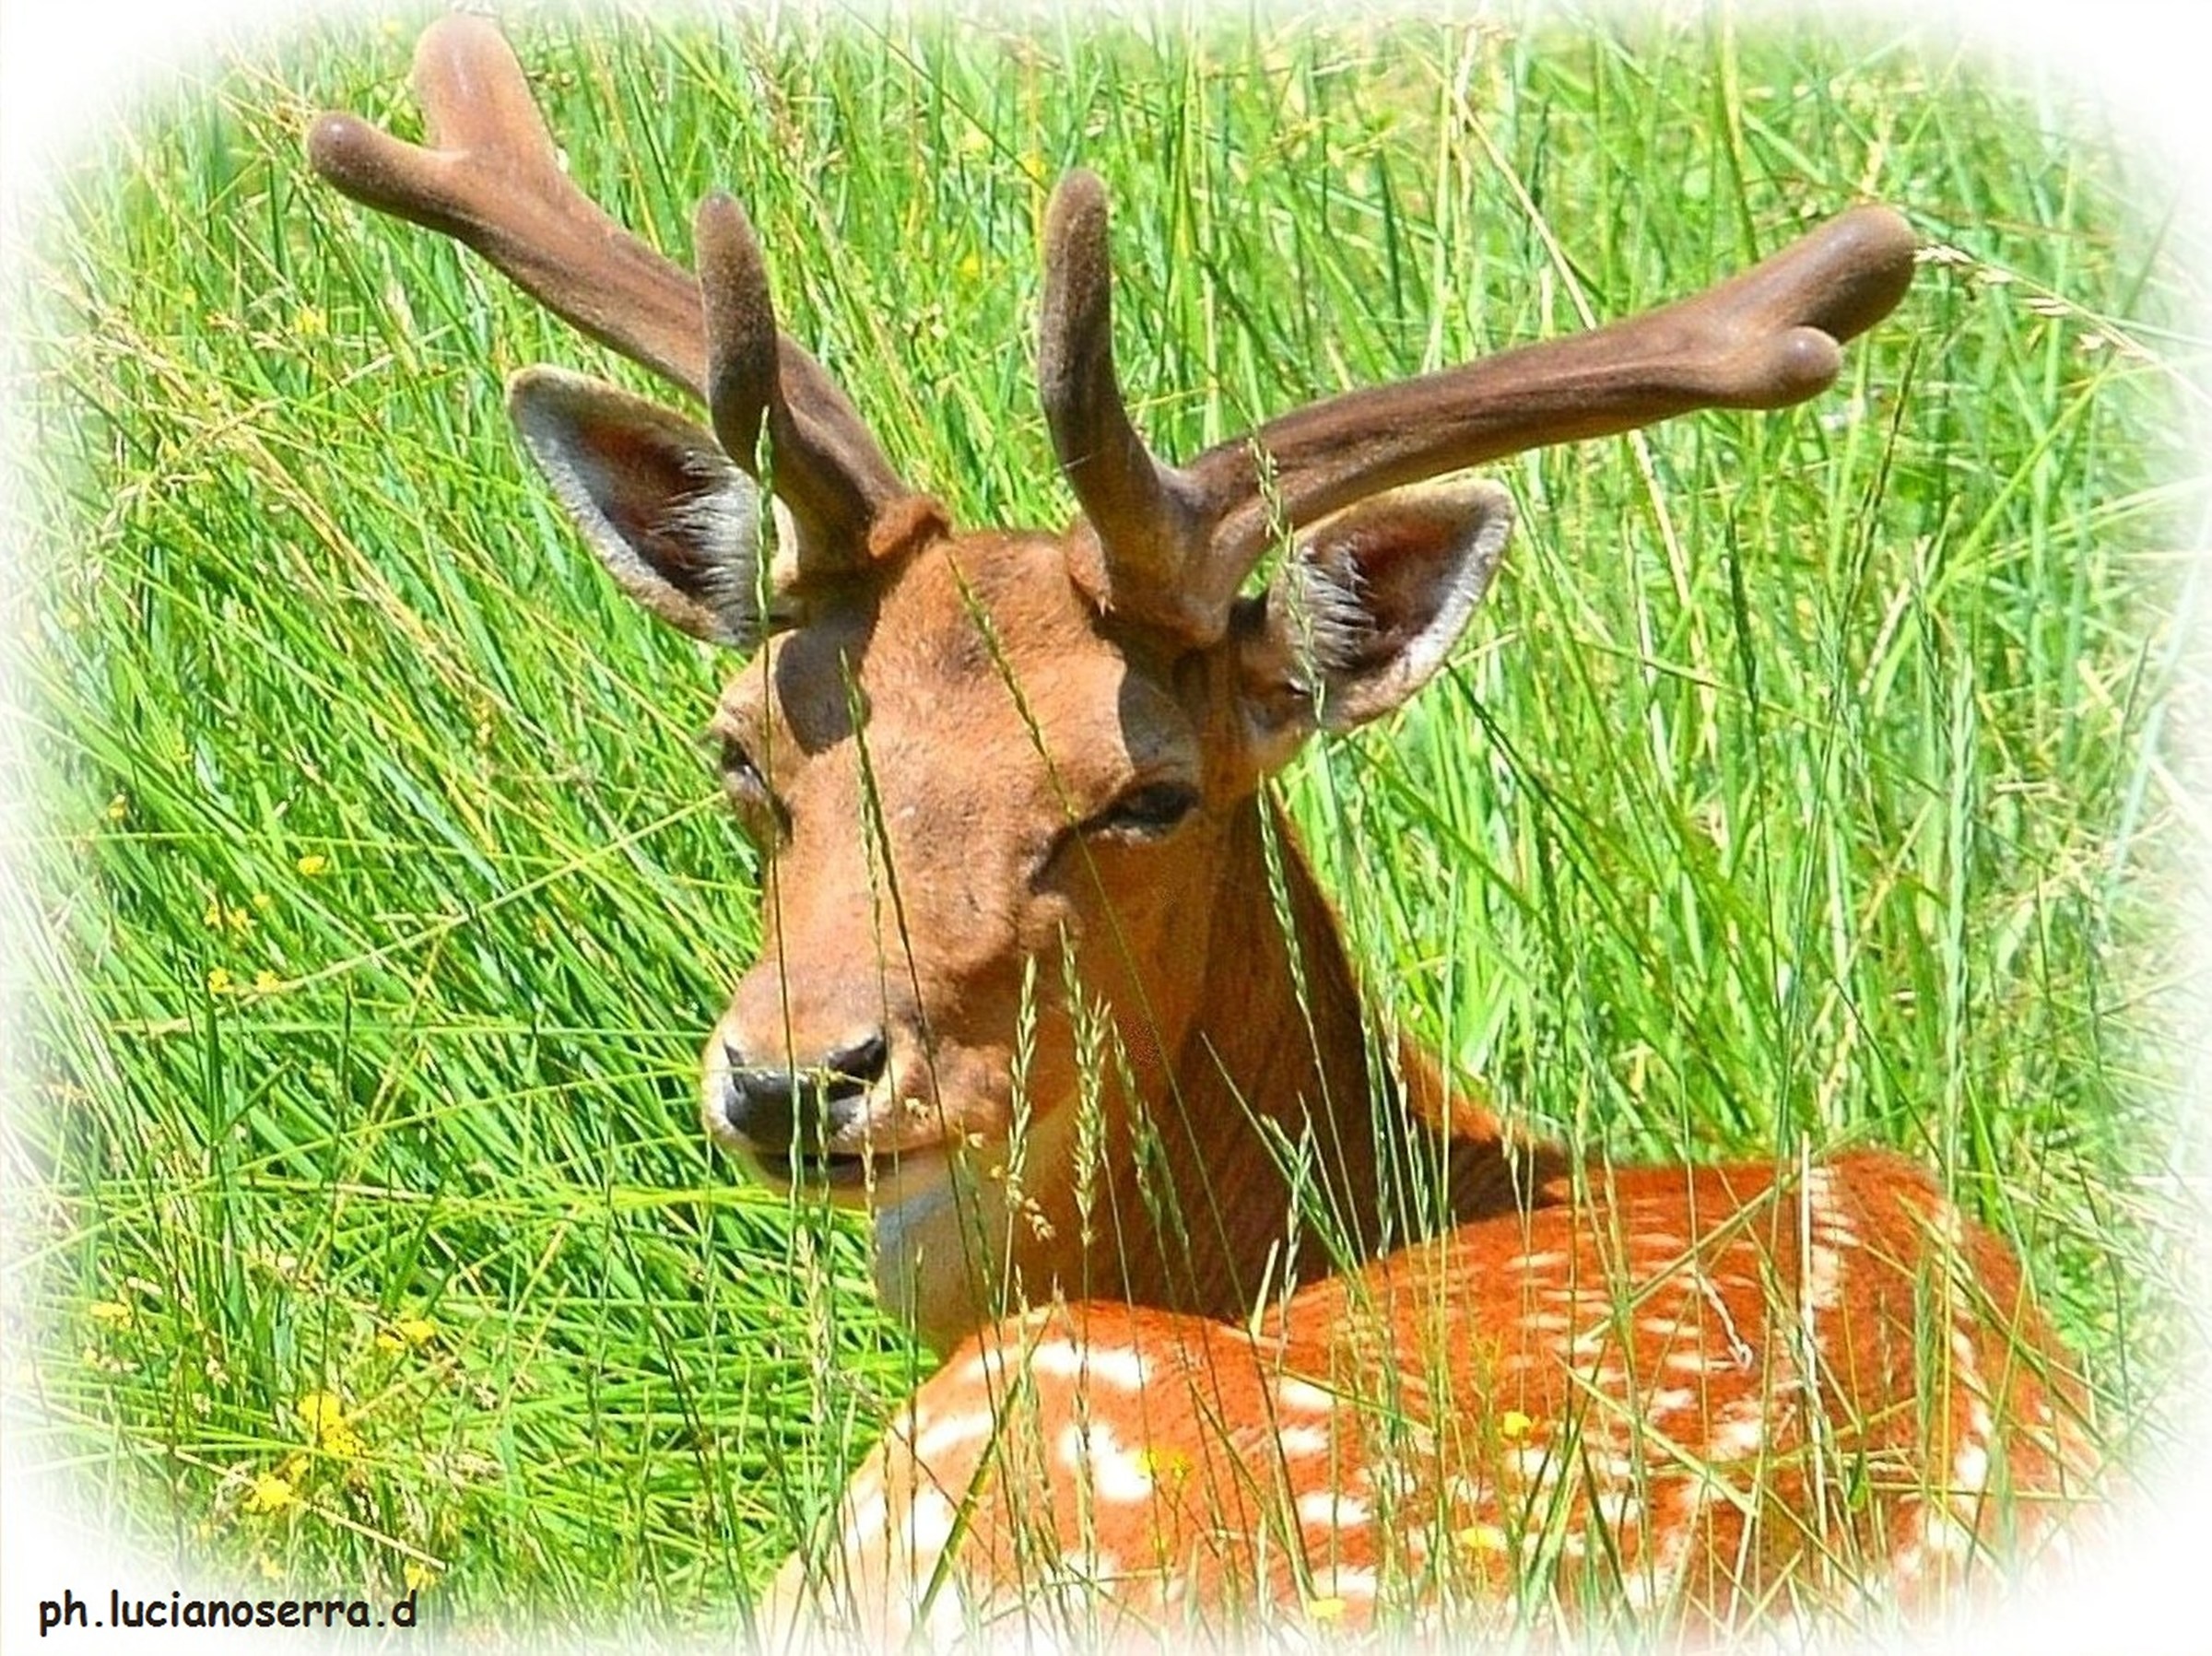 A 'another young deer...